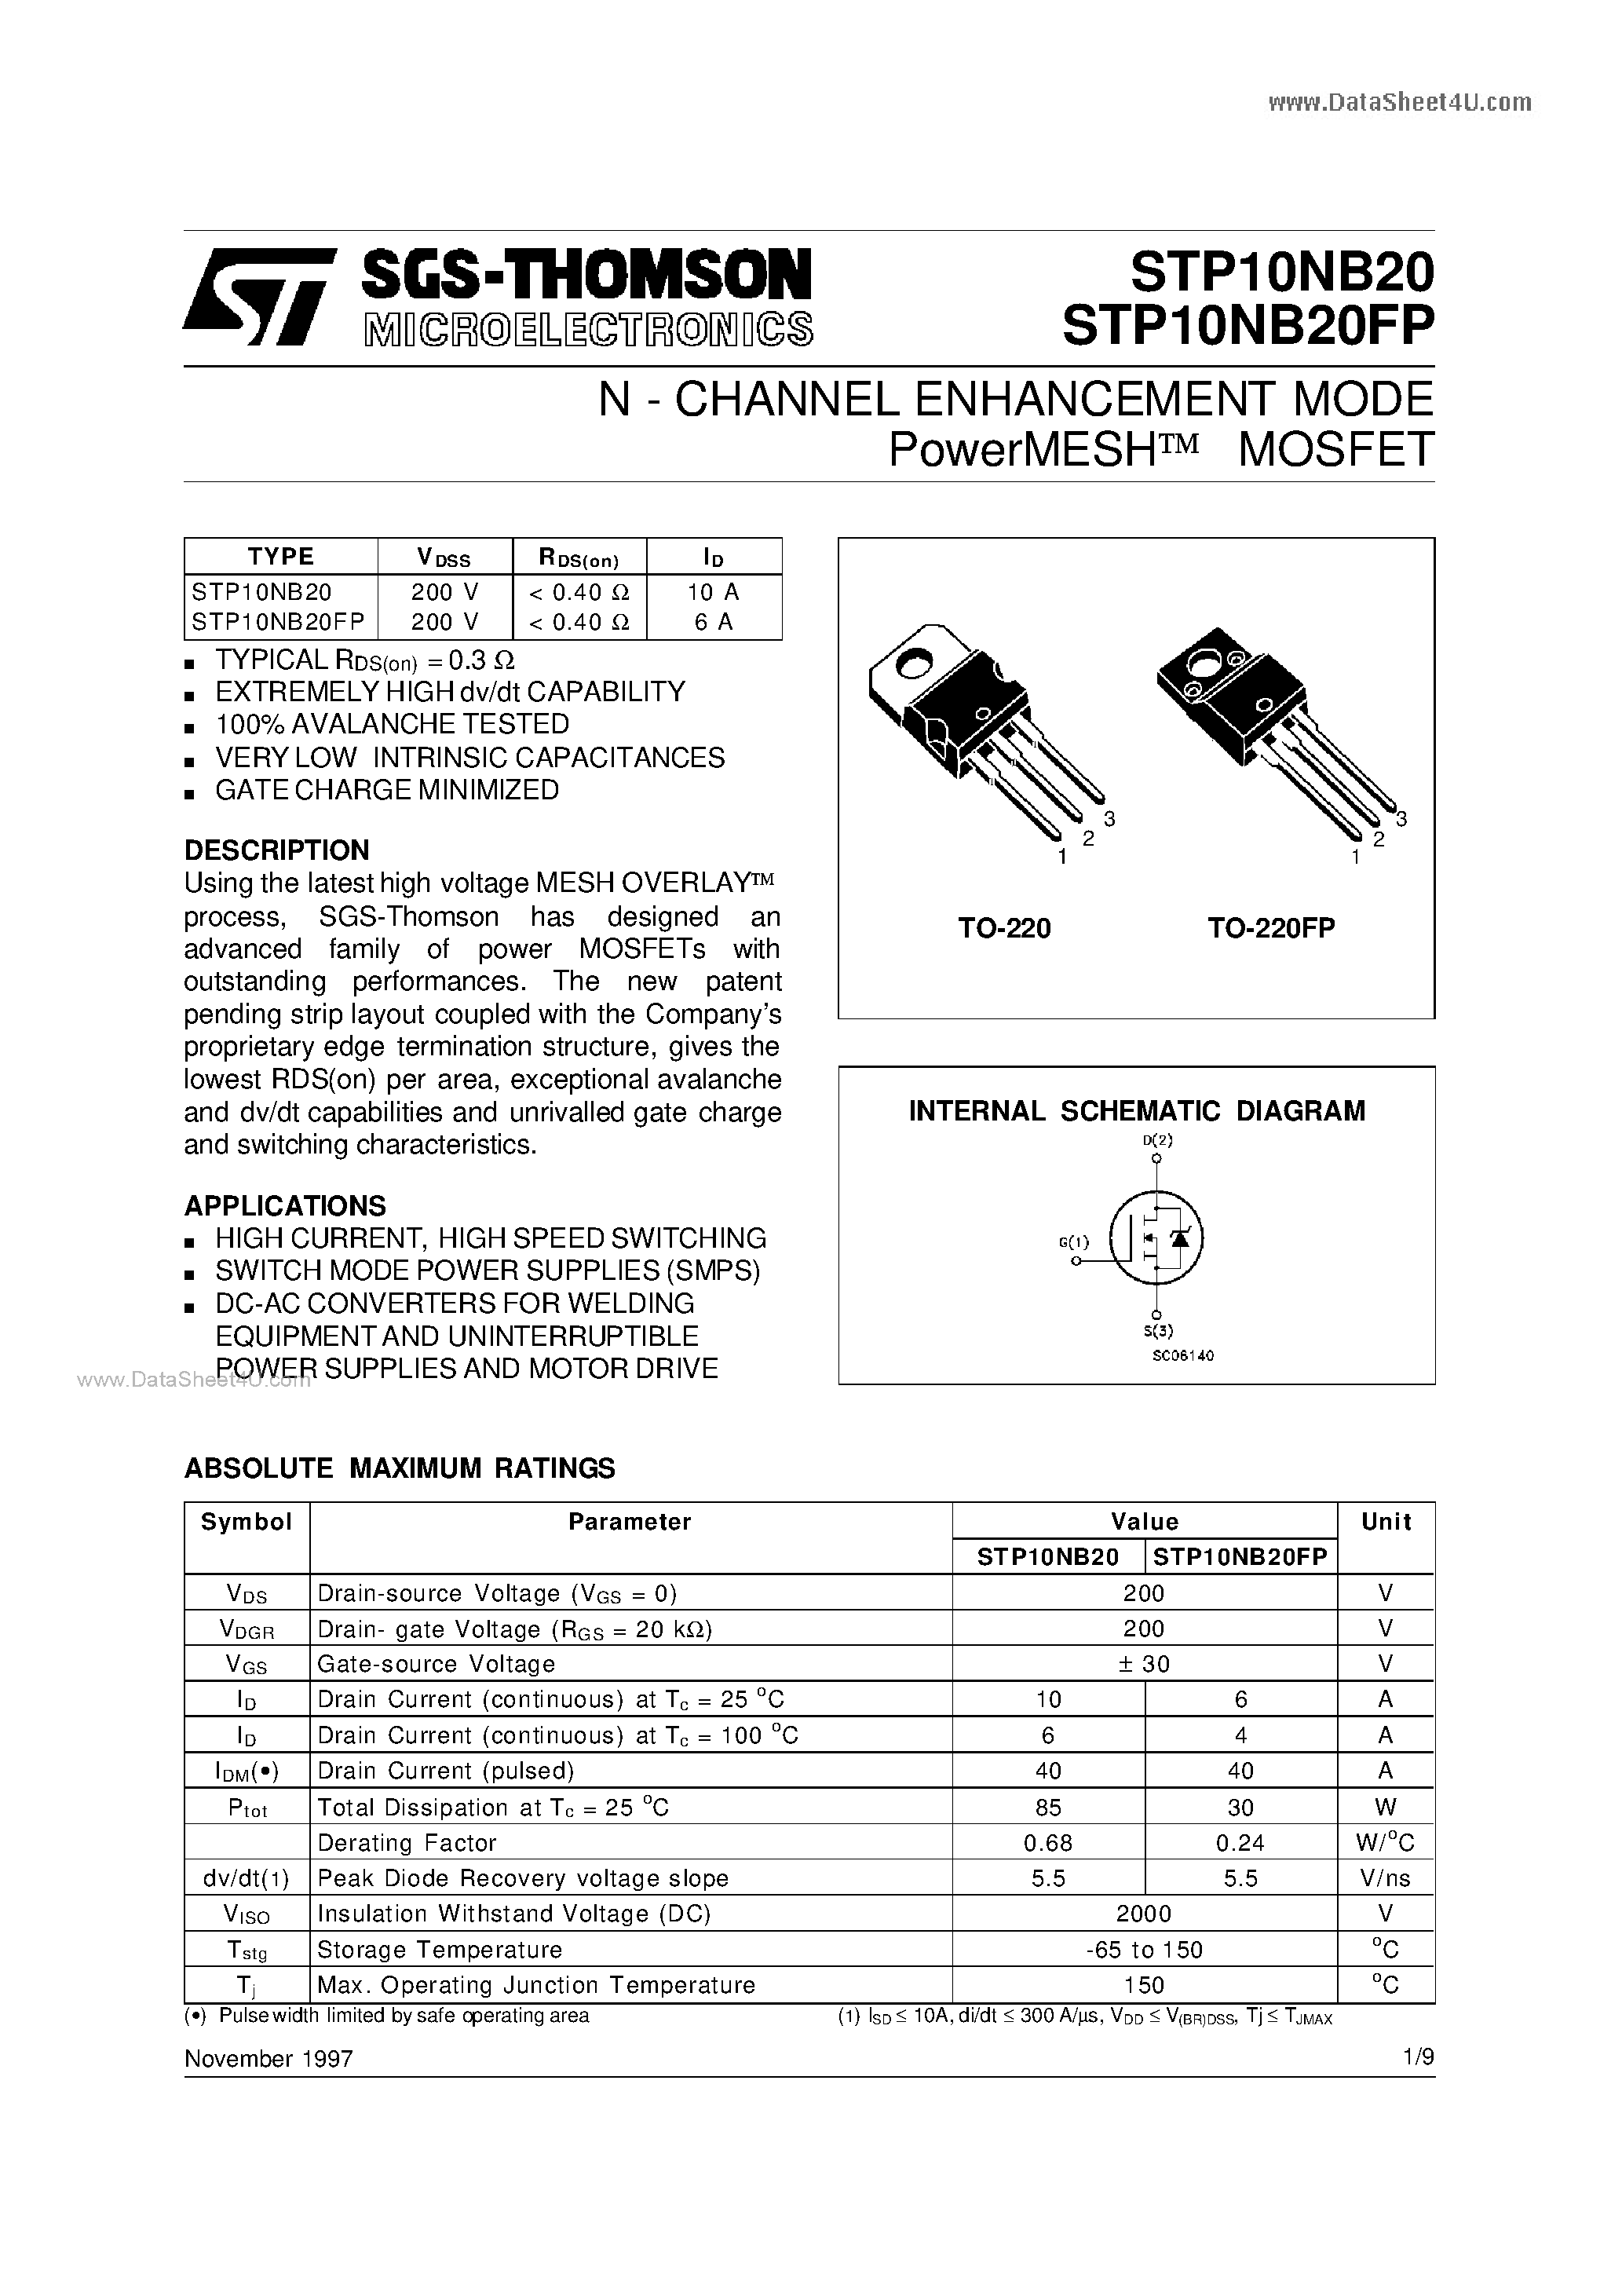 Datasheet P10NB20FP - Search -----> STP10NB20FP page 1